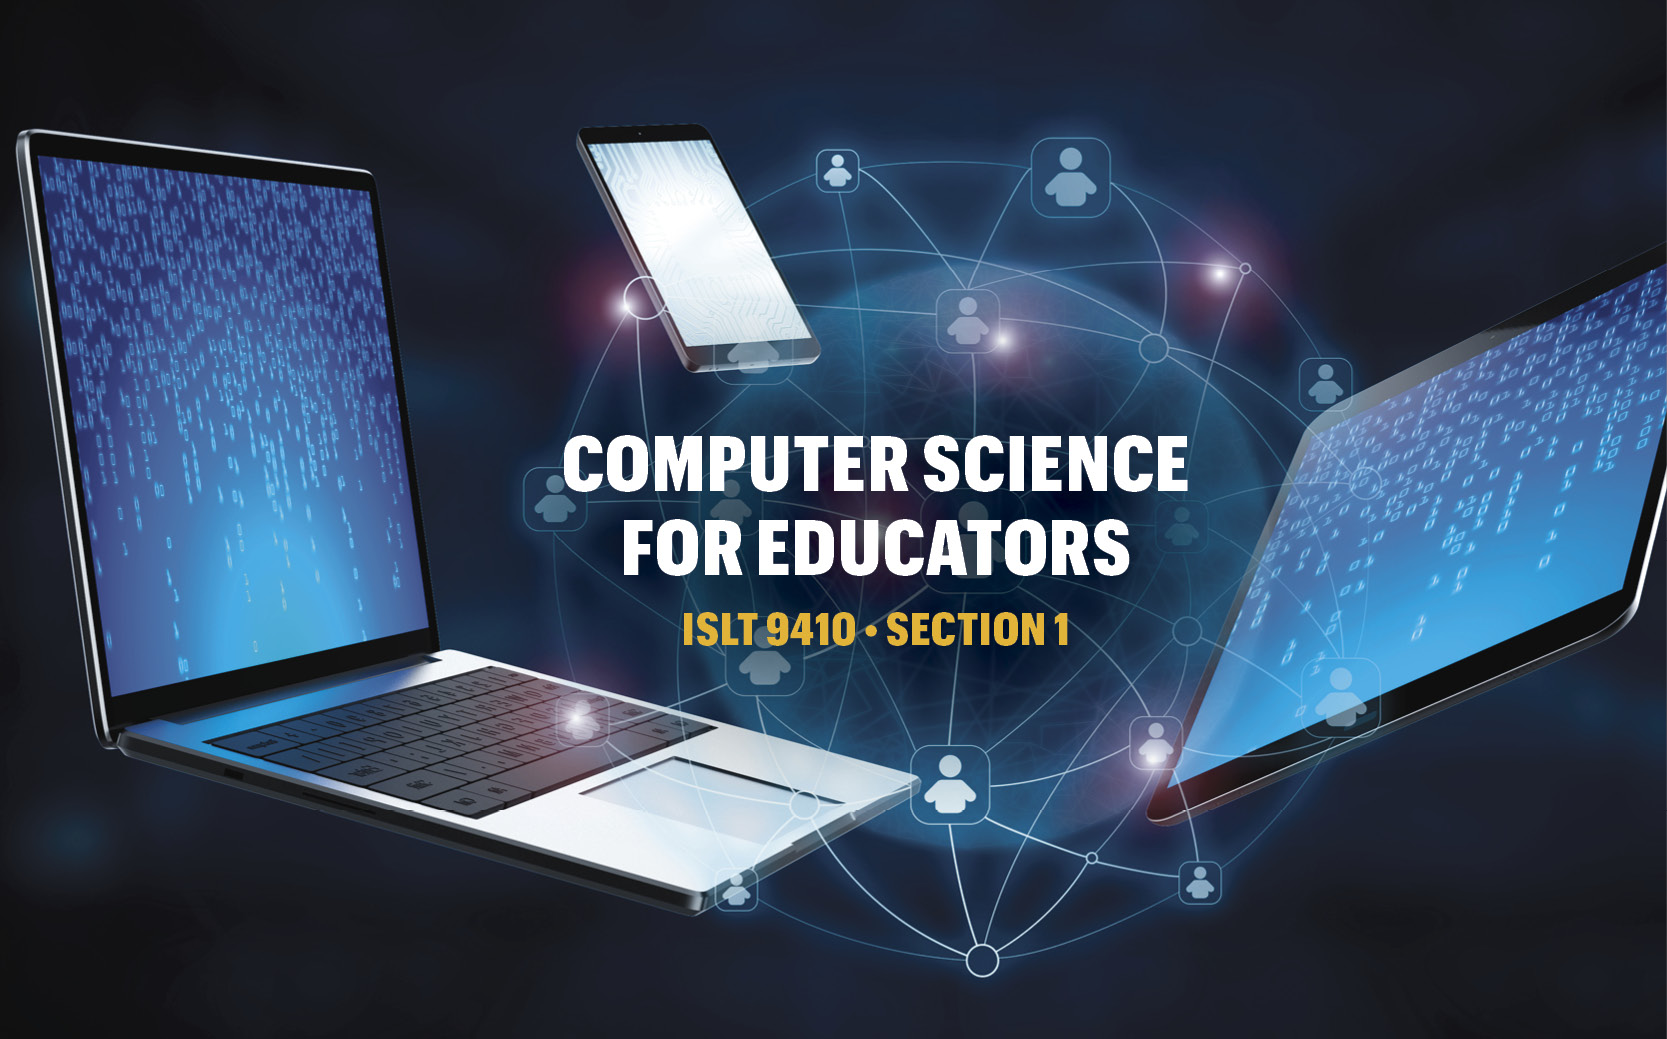 courses under computer science education